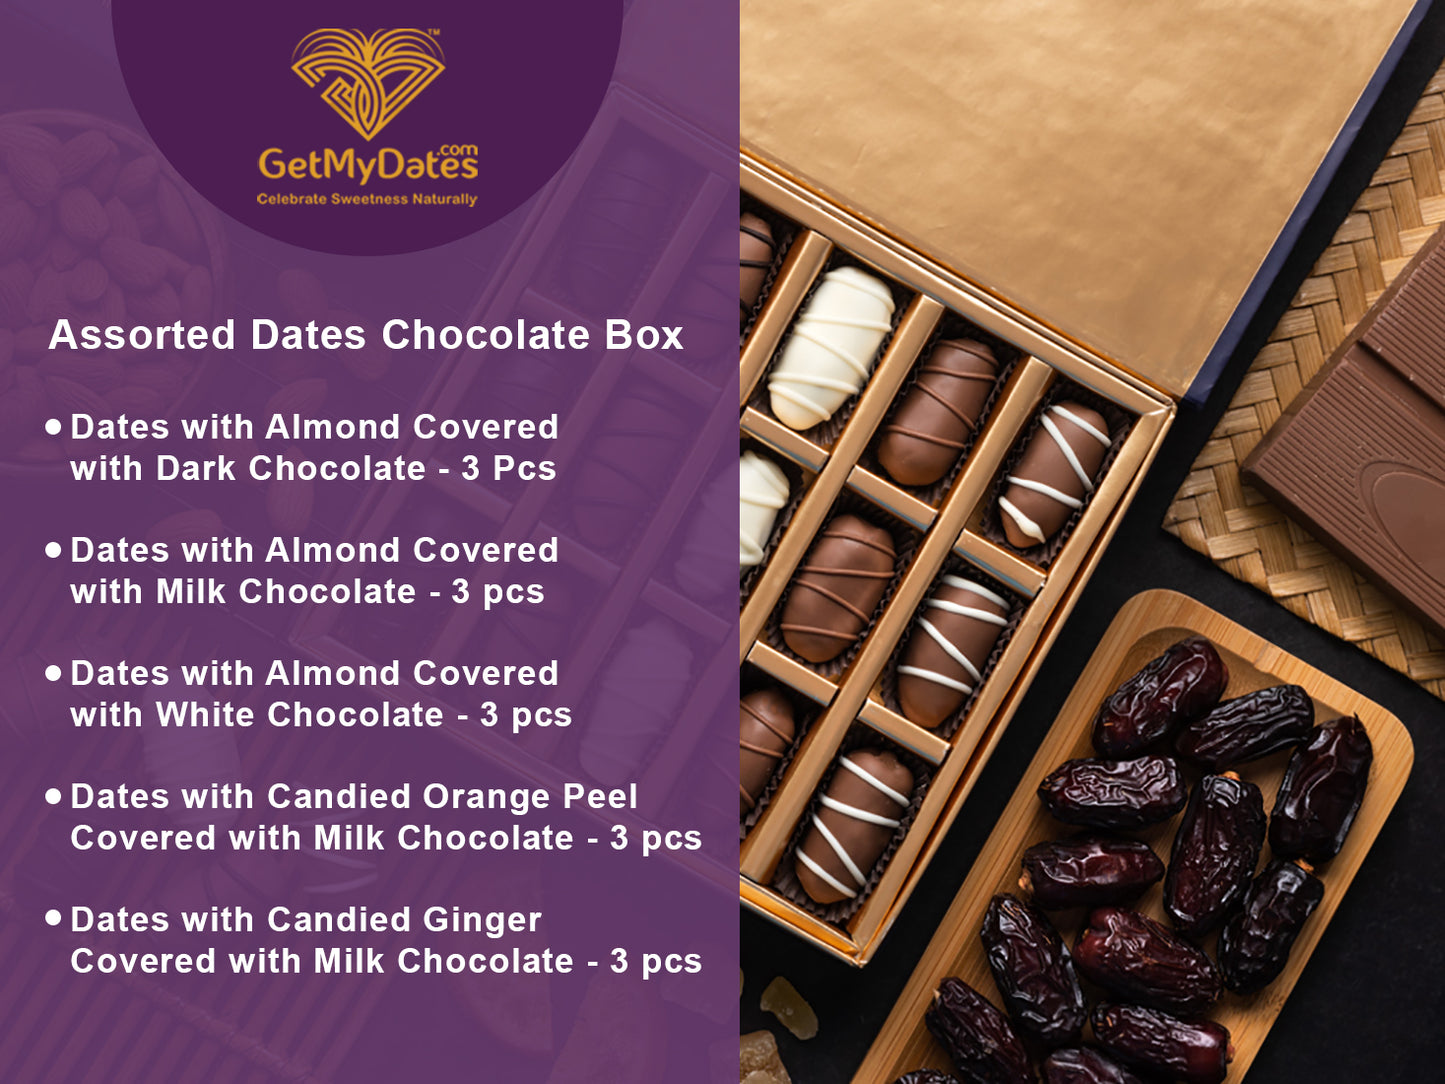 Assorted Chocolate Dates collections comes with 15 pieces 